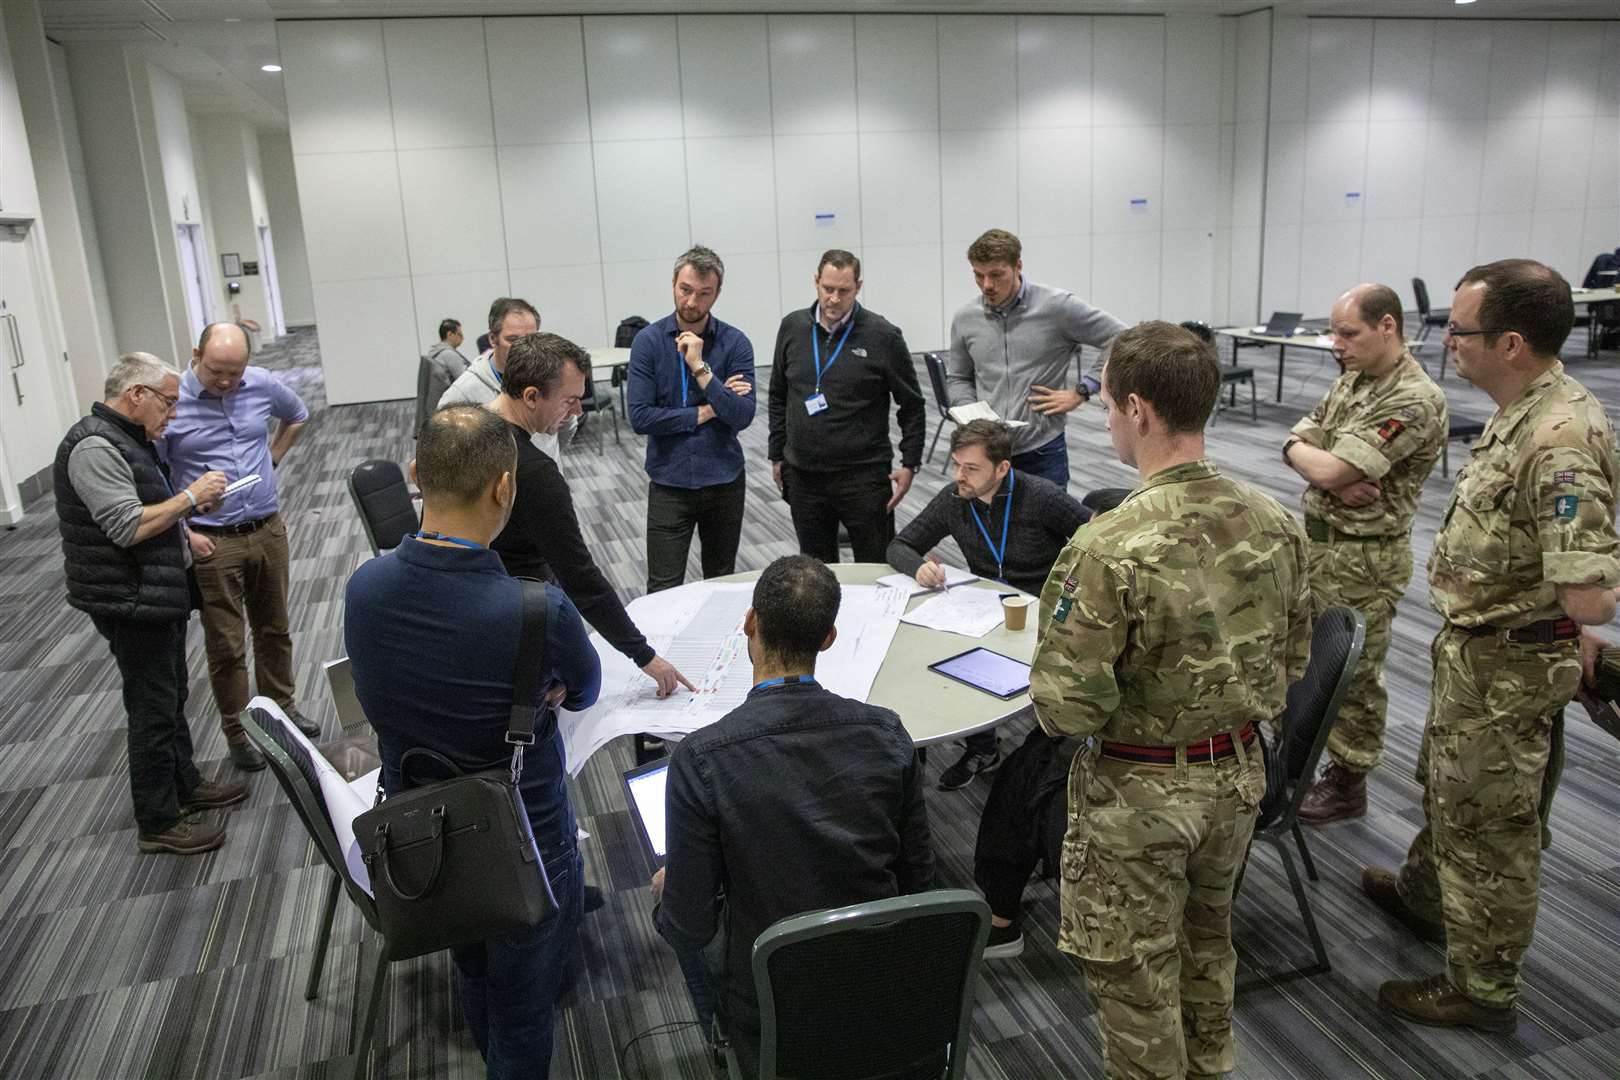 Military aid to the civil authorities has been carried out throughout the coronavirus pandemic, including during the construction of a temporary hospital at the ExCel in London, March 2020 (Dave Jenkins/MoD/PA)